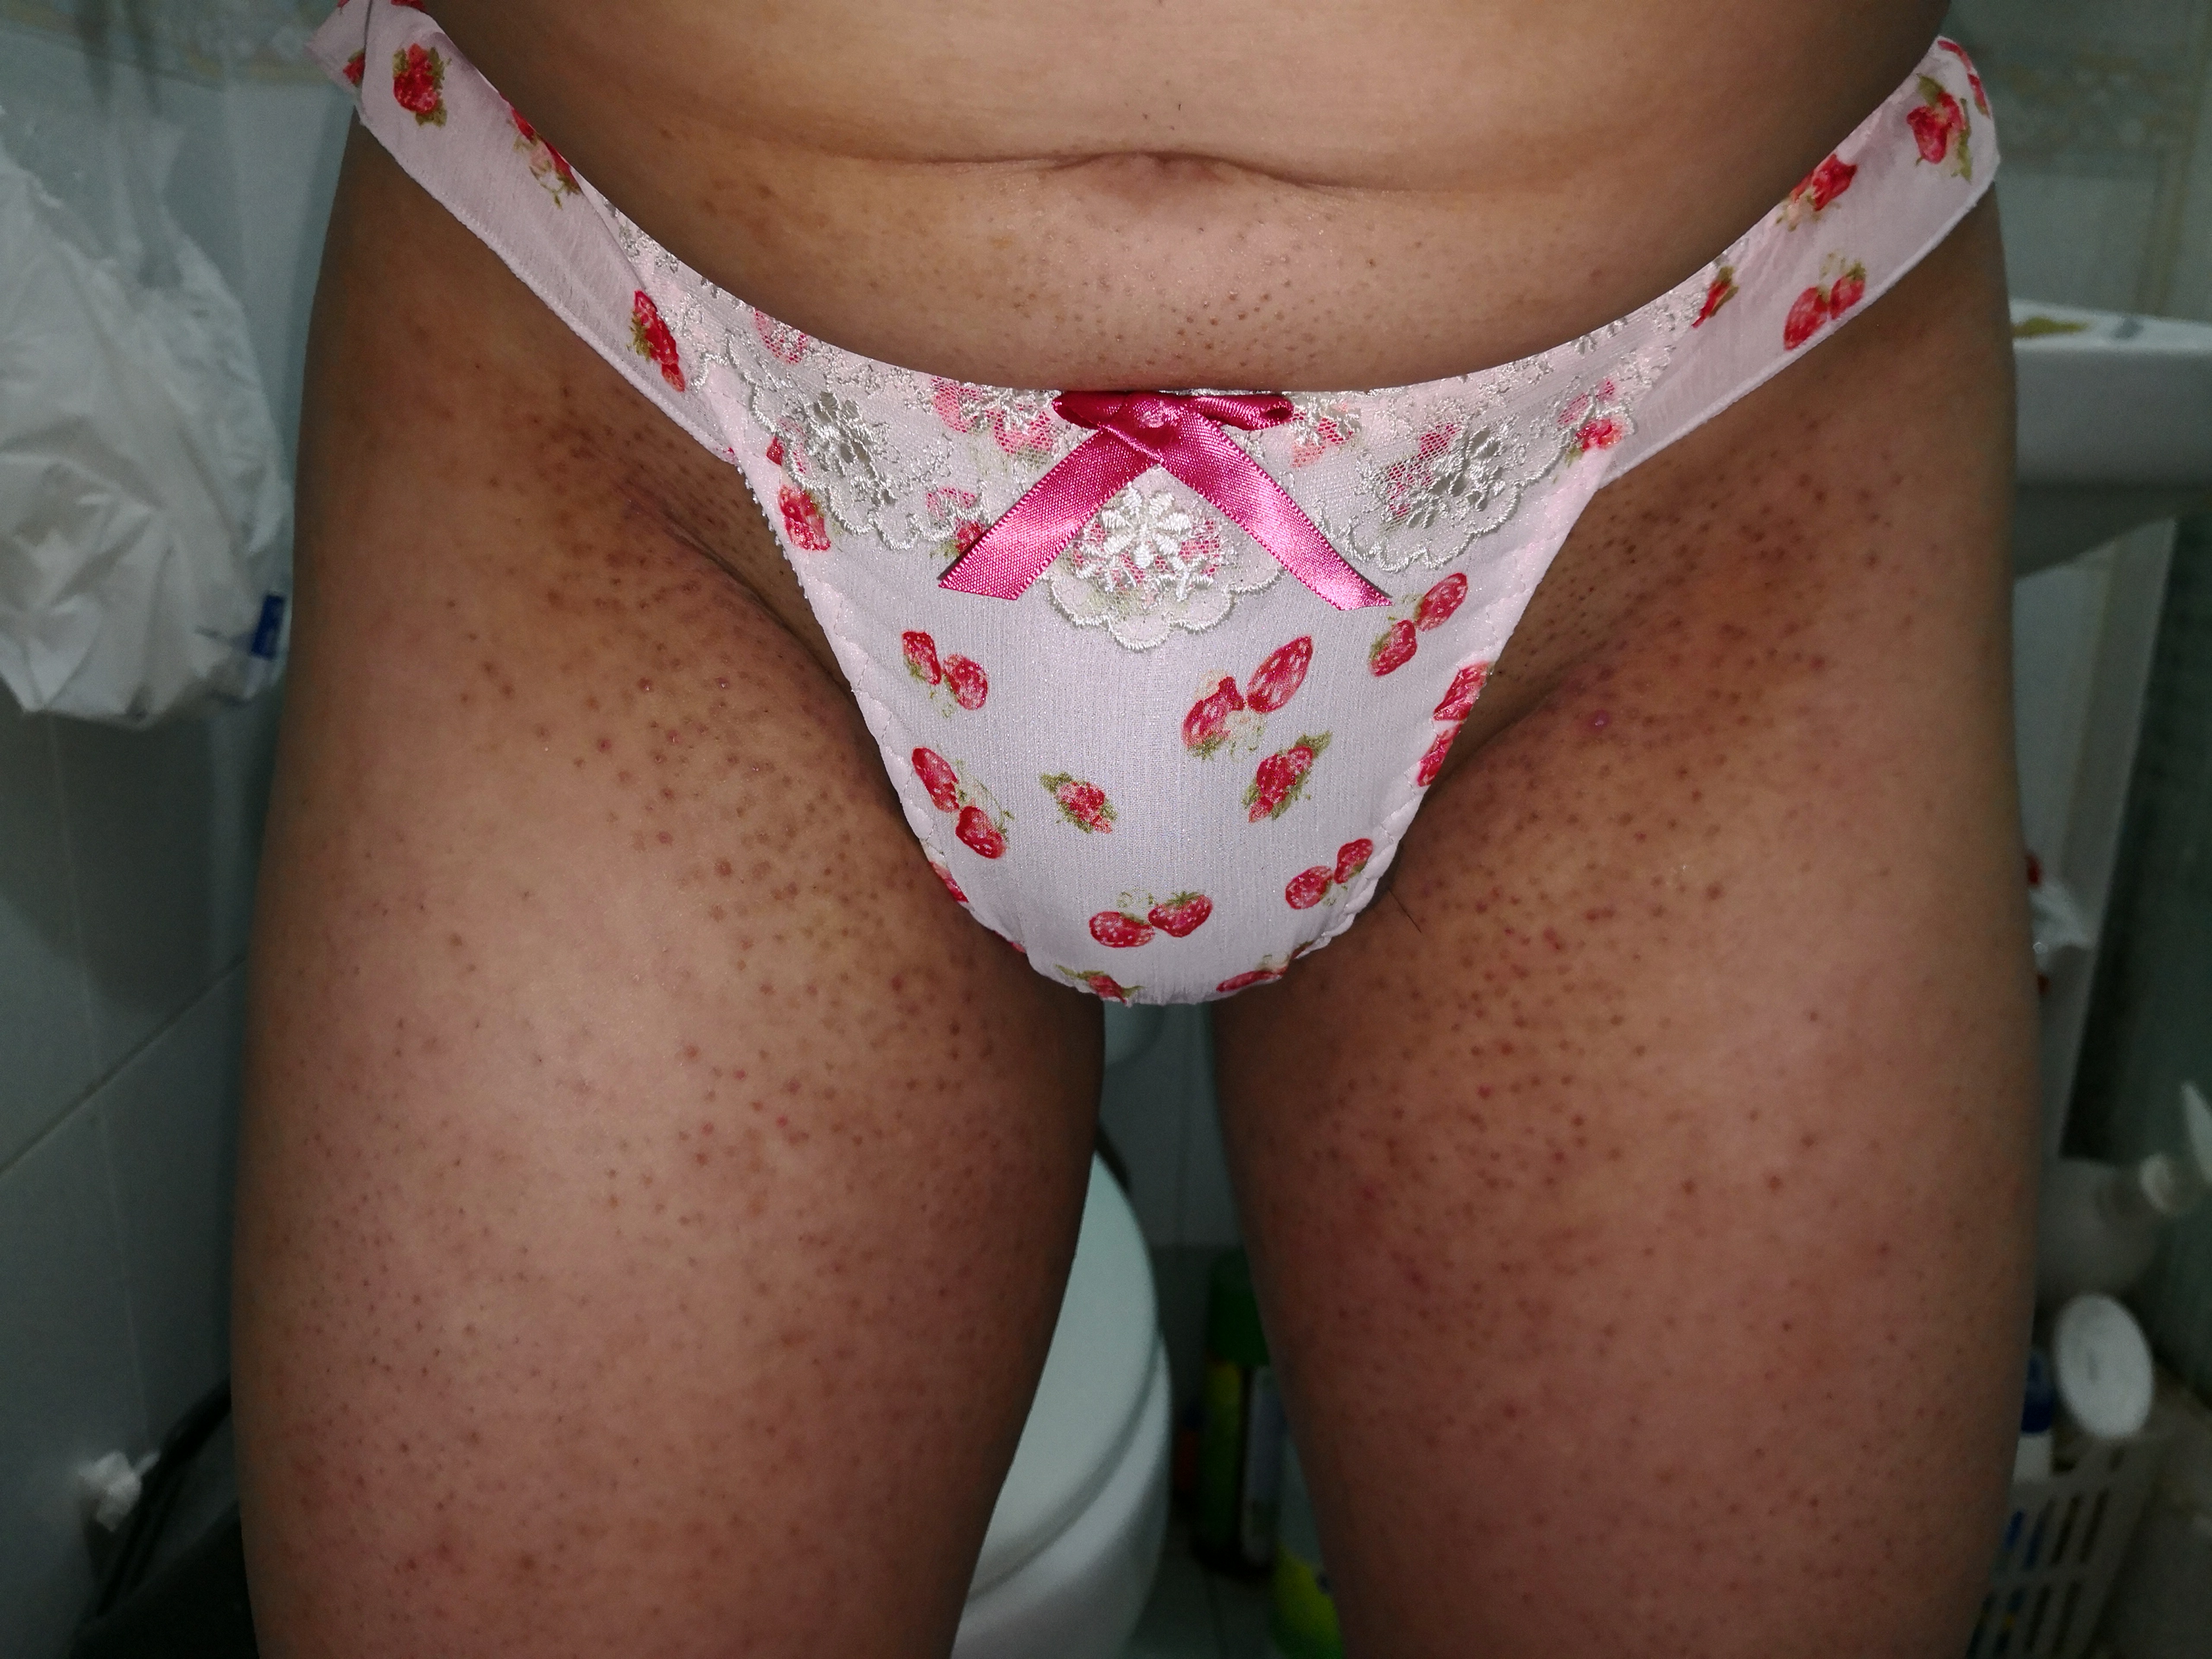 Let put on this lovely Strawberry pattern pink panty!